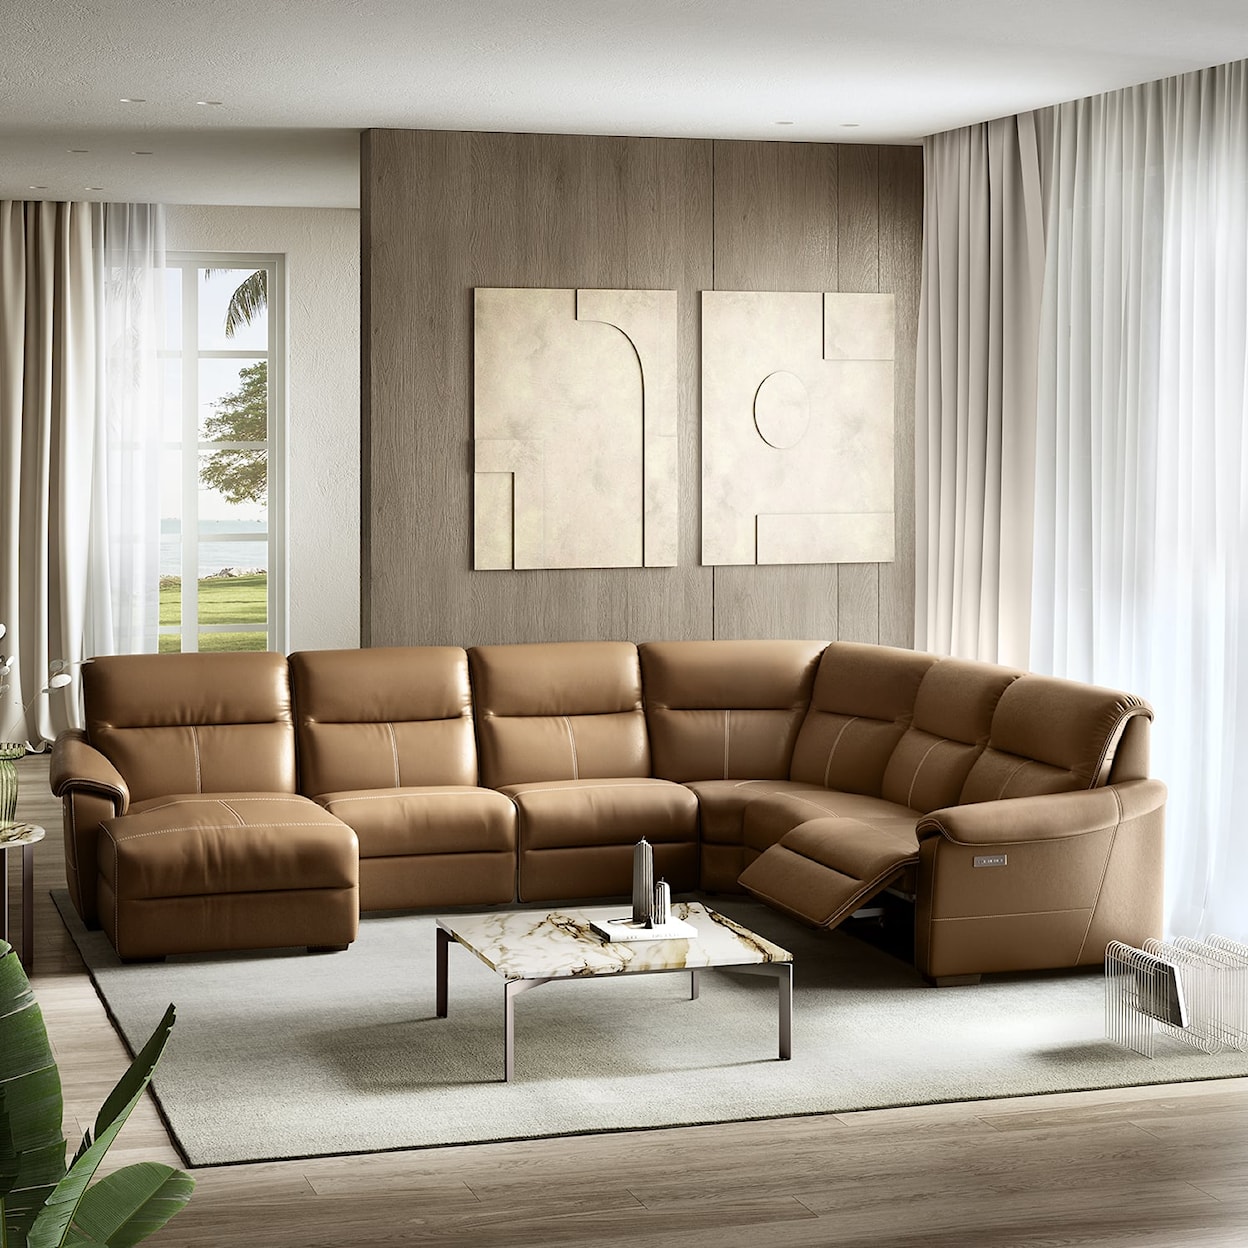 Natuzzi Editions Potenza Potenza L-Shaped Sectional with Left Chaise